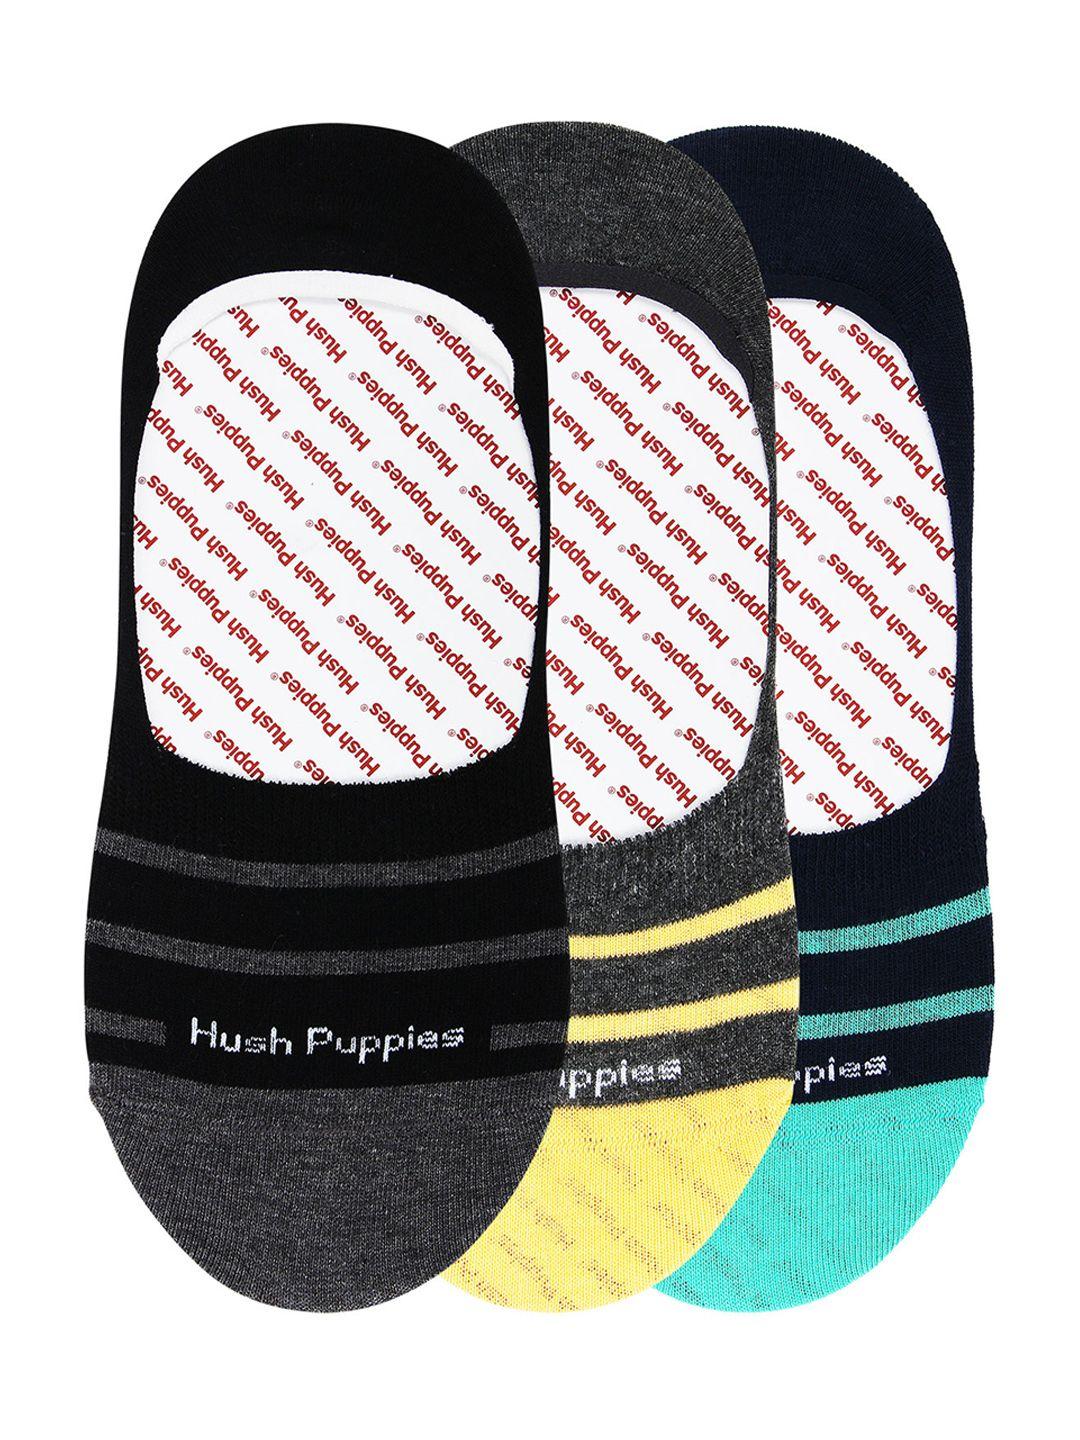 hush puppies men pack of 3 assorted patterned shoe liners